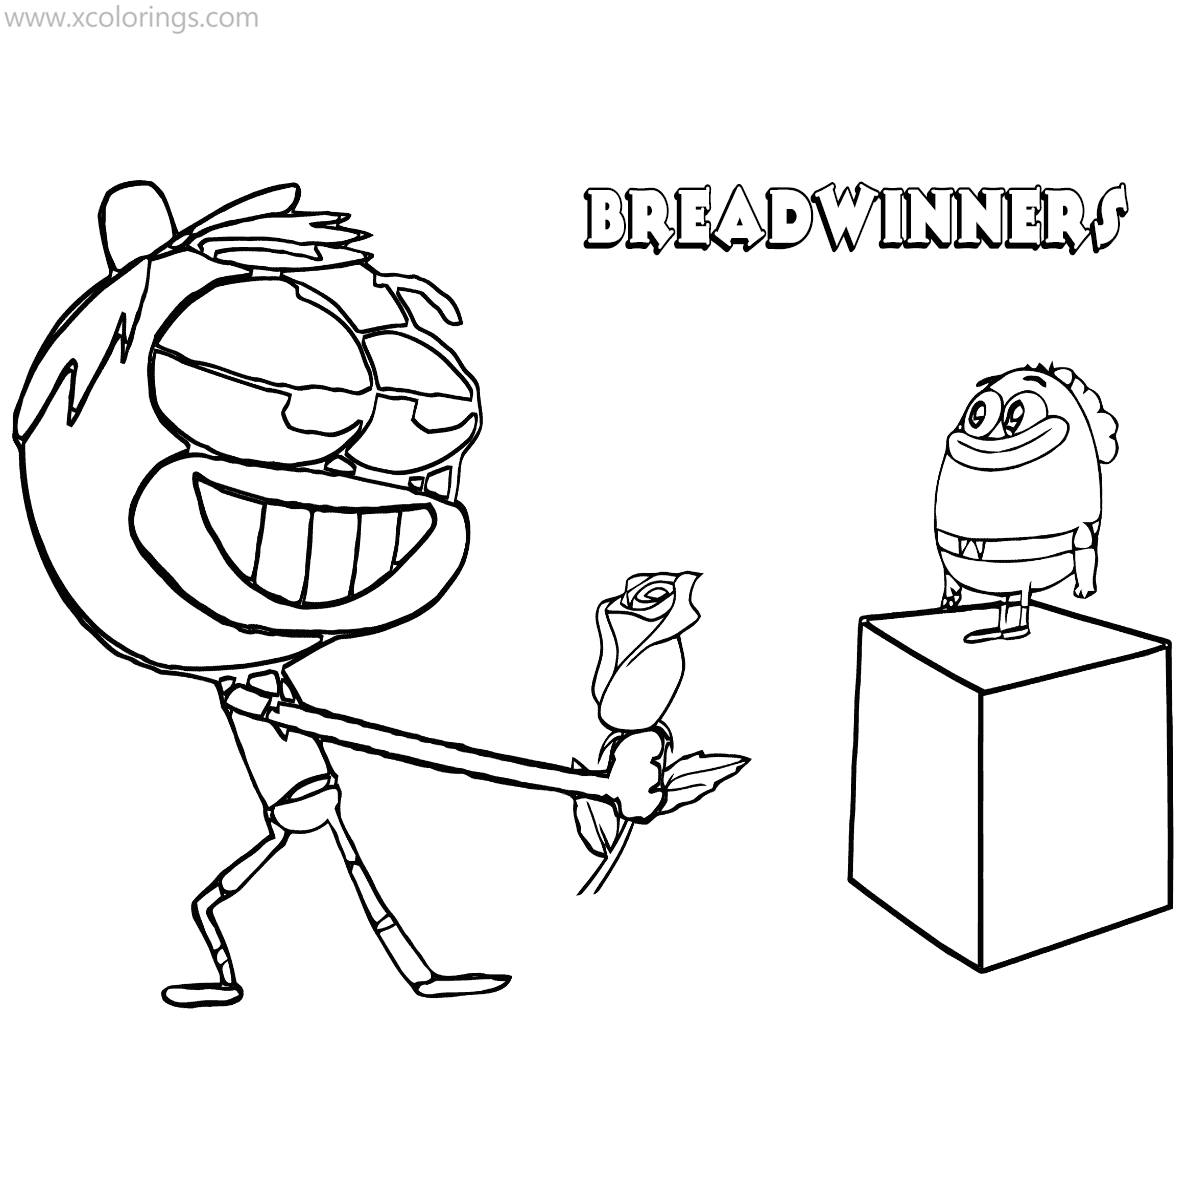 Free Breadwinners Coloring Pages Rose printable